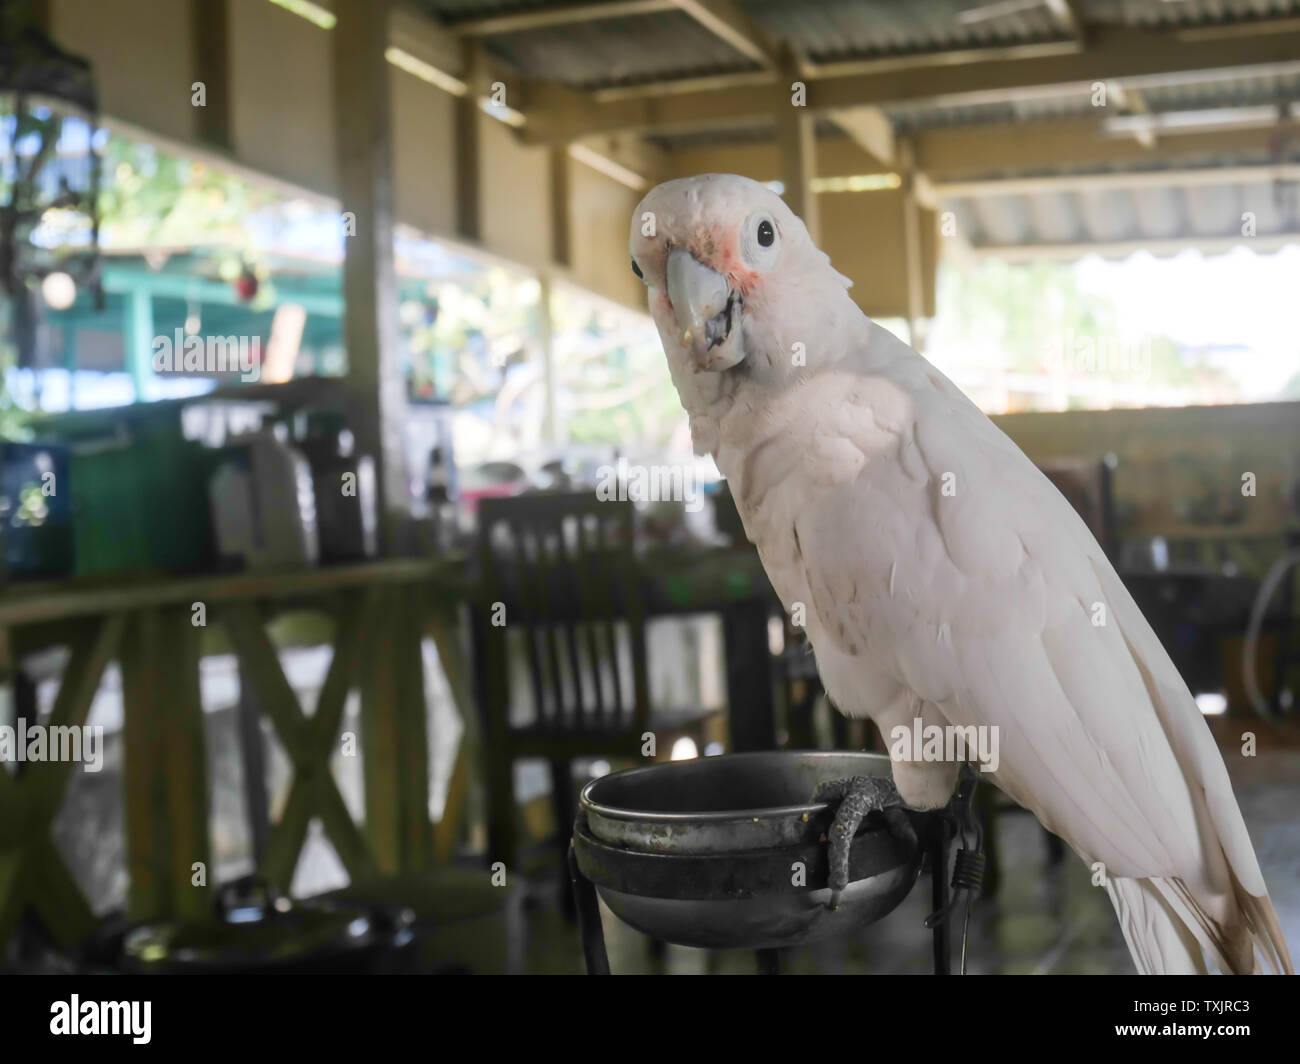 Parrots White Parrots In Farm White Macaw Parrot In Nature Parrot That Is A Pet Stock Photo Alamy,Oatmeal Cookie Shot